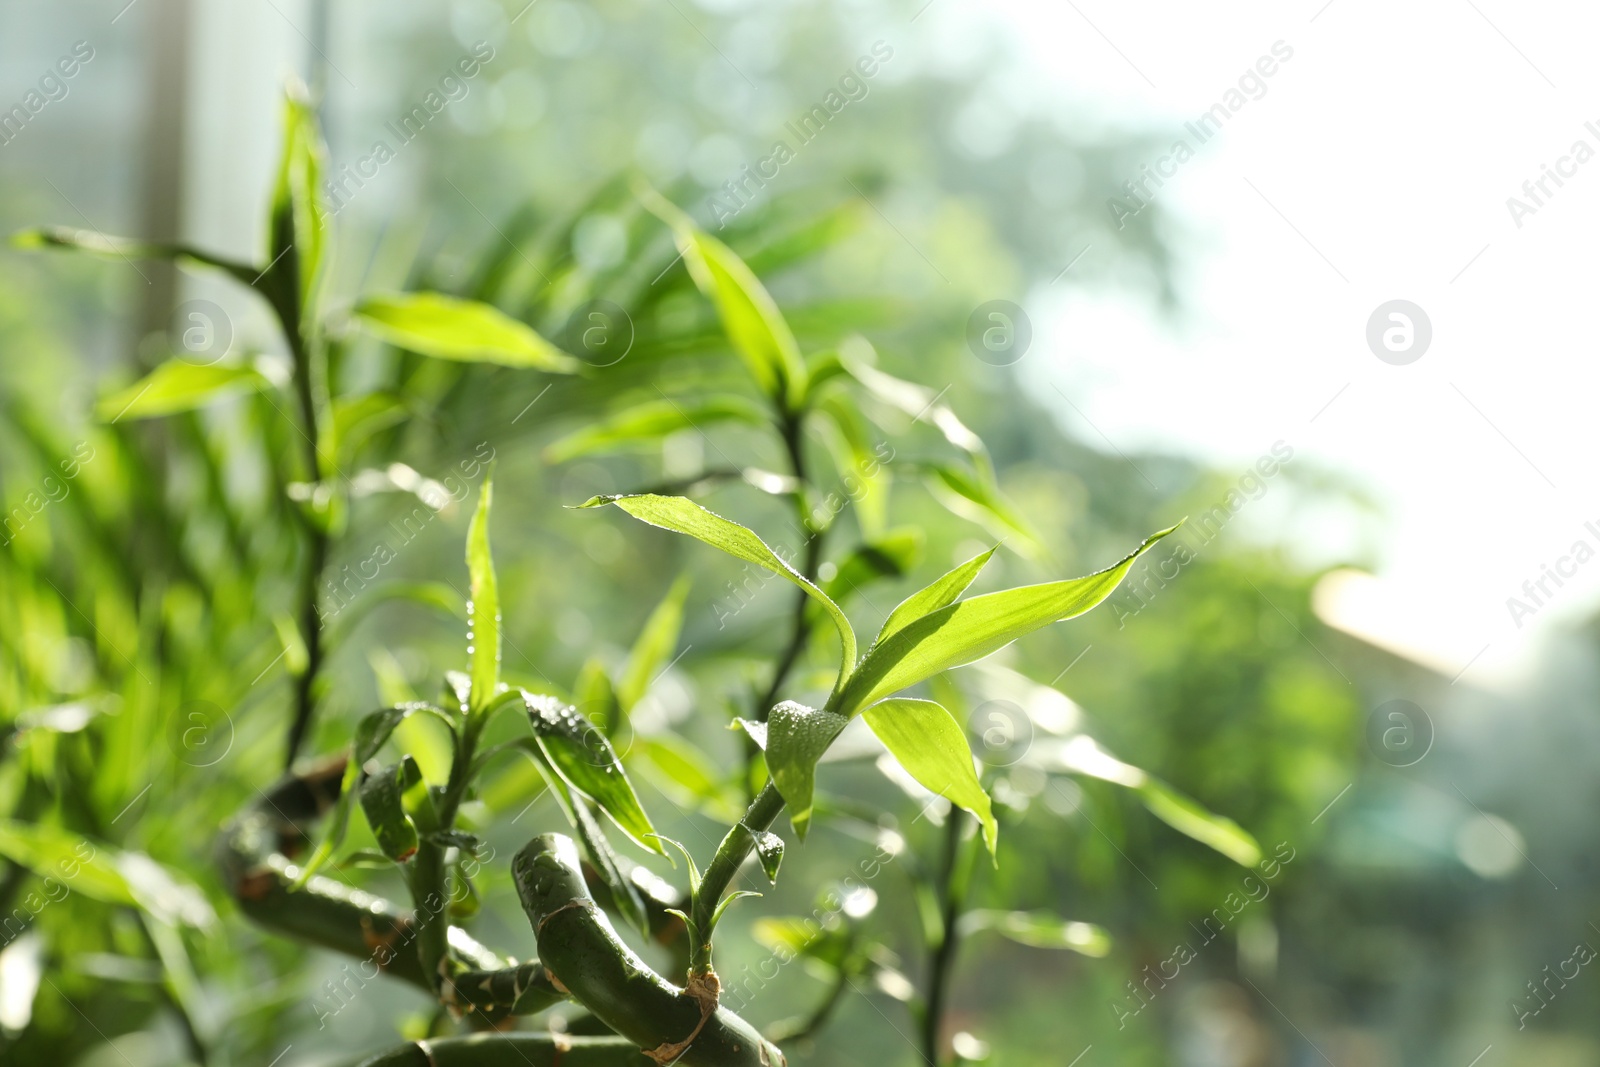 Photo of Bamboo stems with water drops on blurred background, closeup